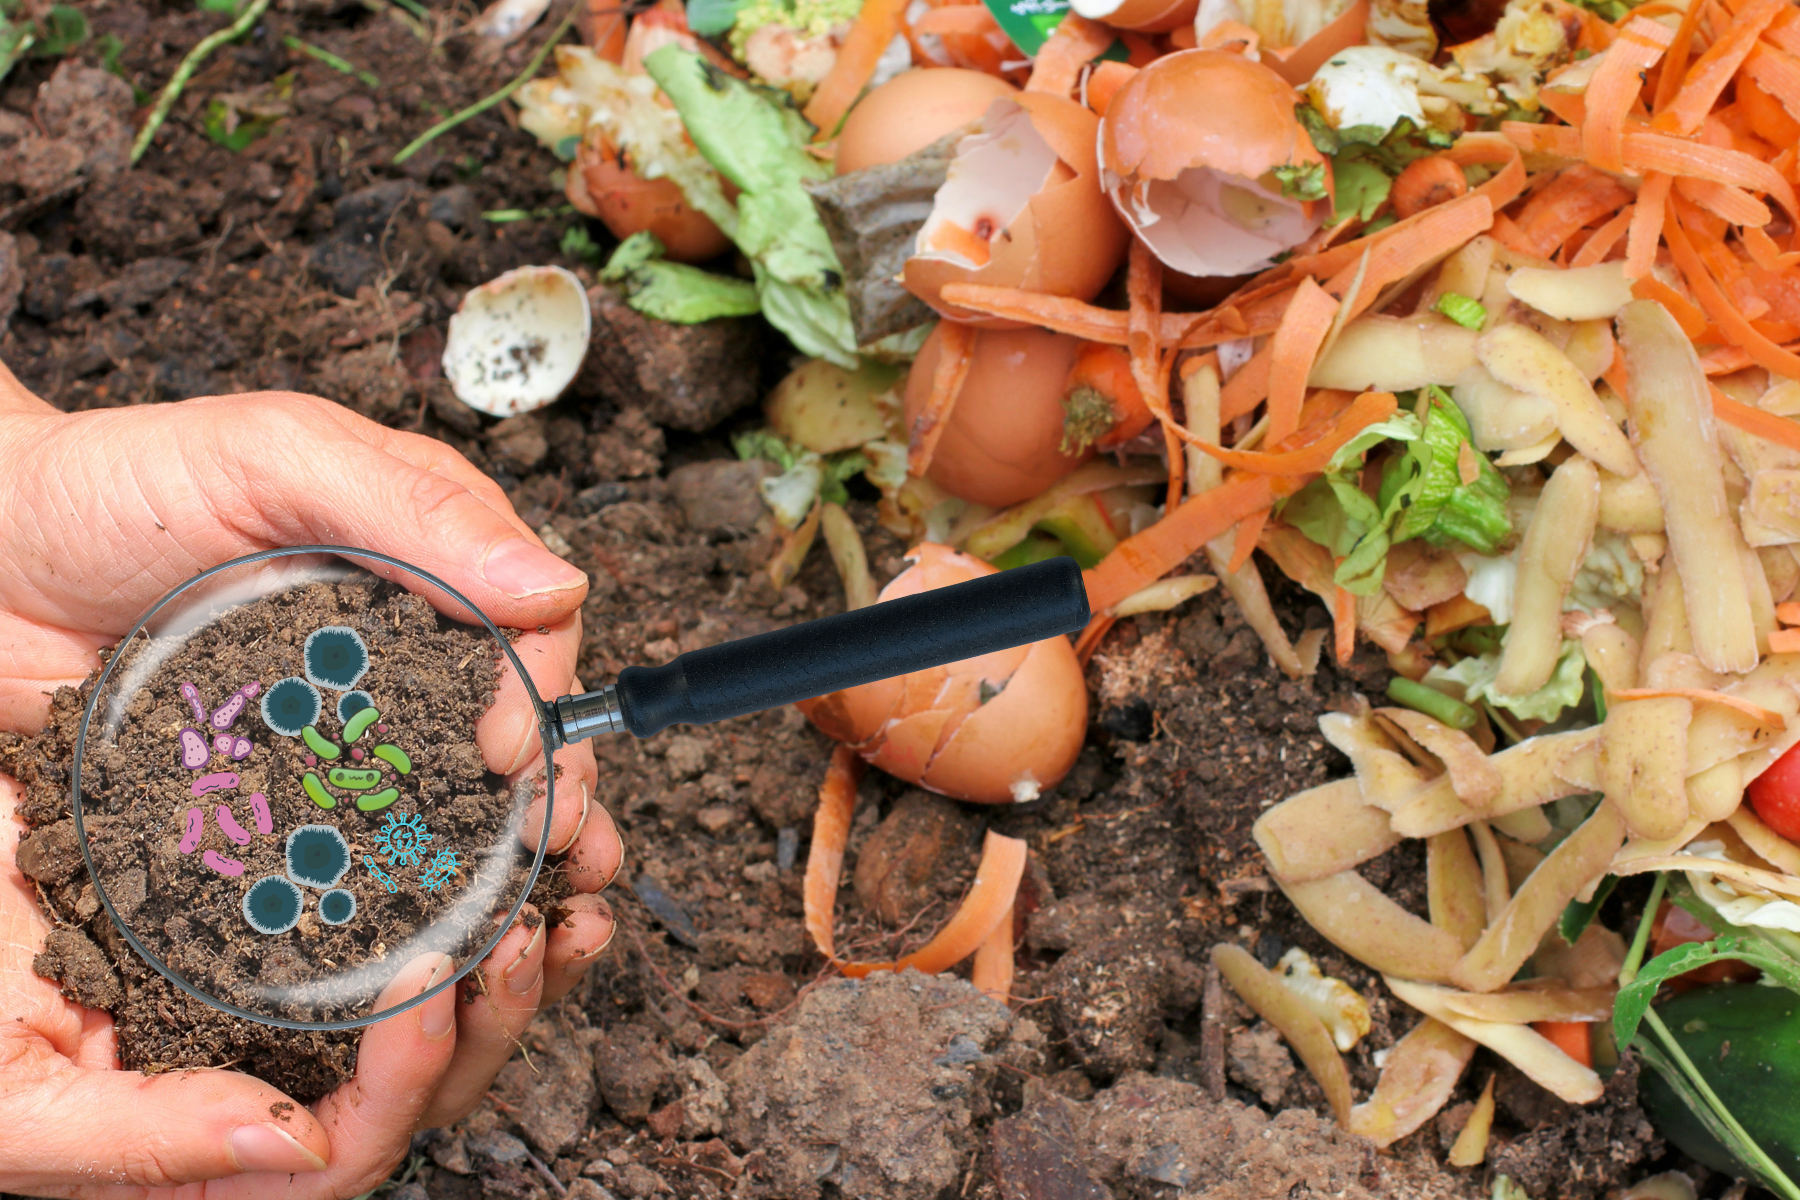 Composting uses biodegradation to turn waste into a nutrient-rich additive for growing new plants.